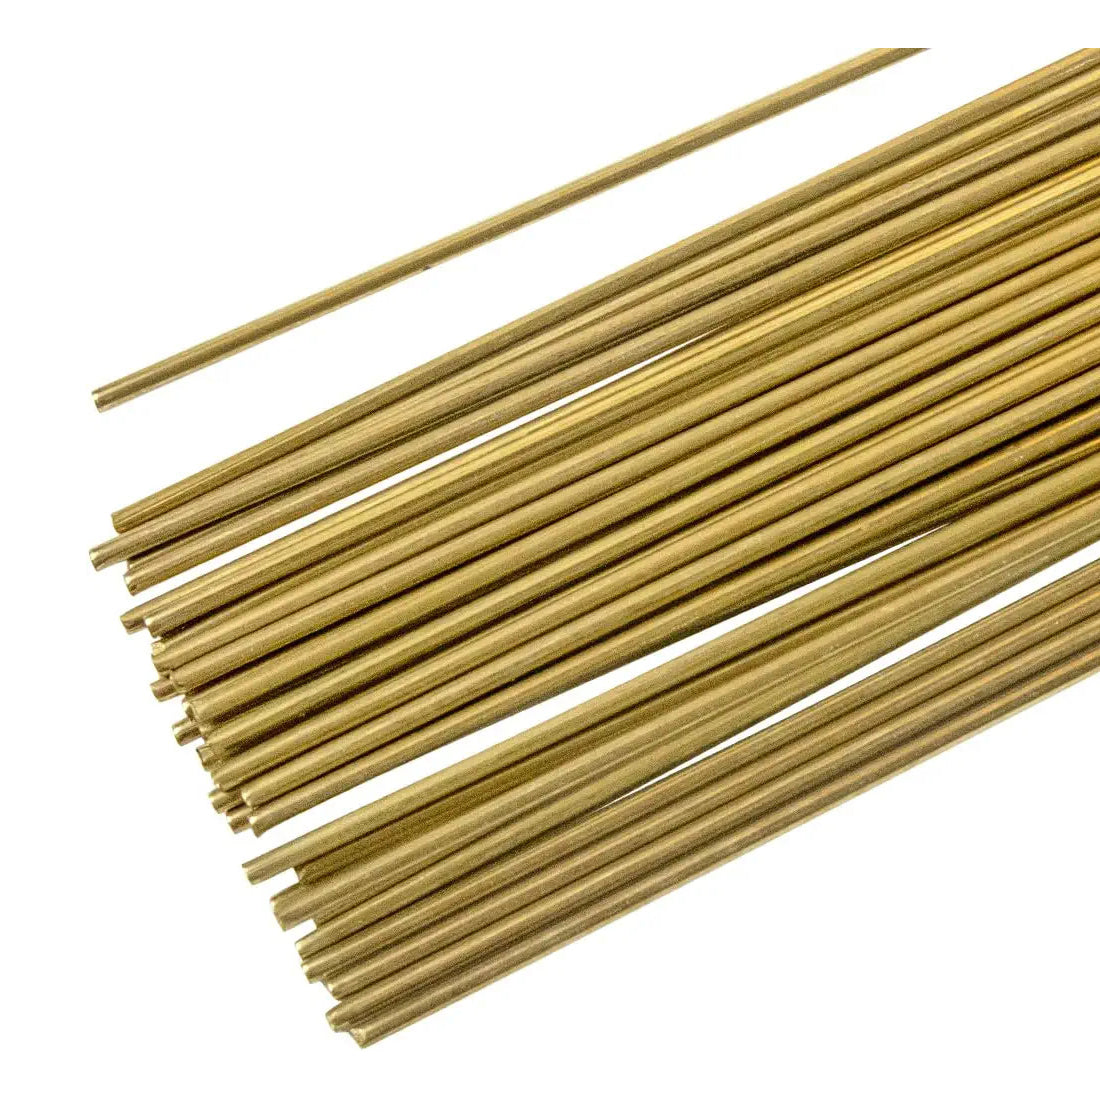 JCU60ZN 1/2 lb 40 sticks Brass Brazing Rods containing small amounts of tin and silicon